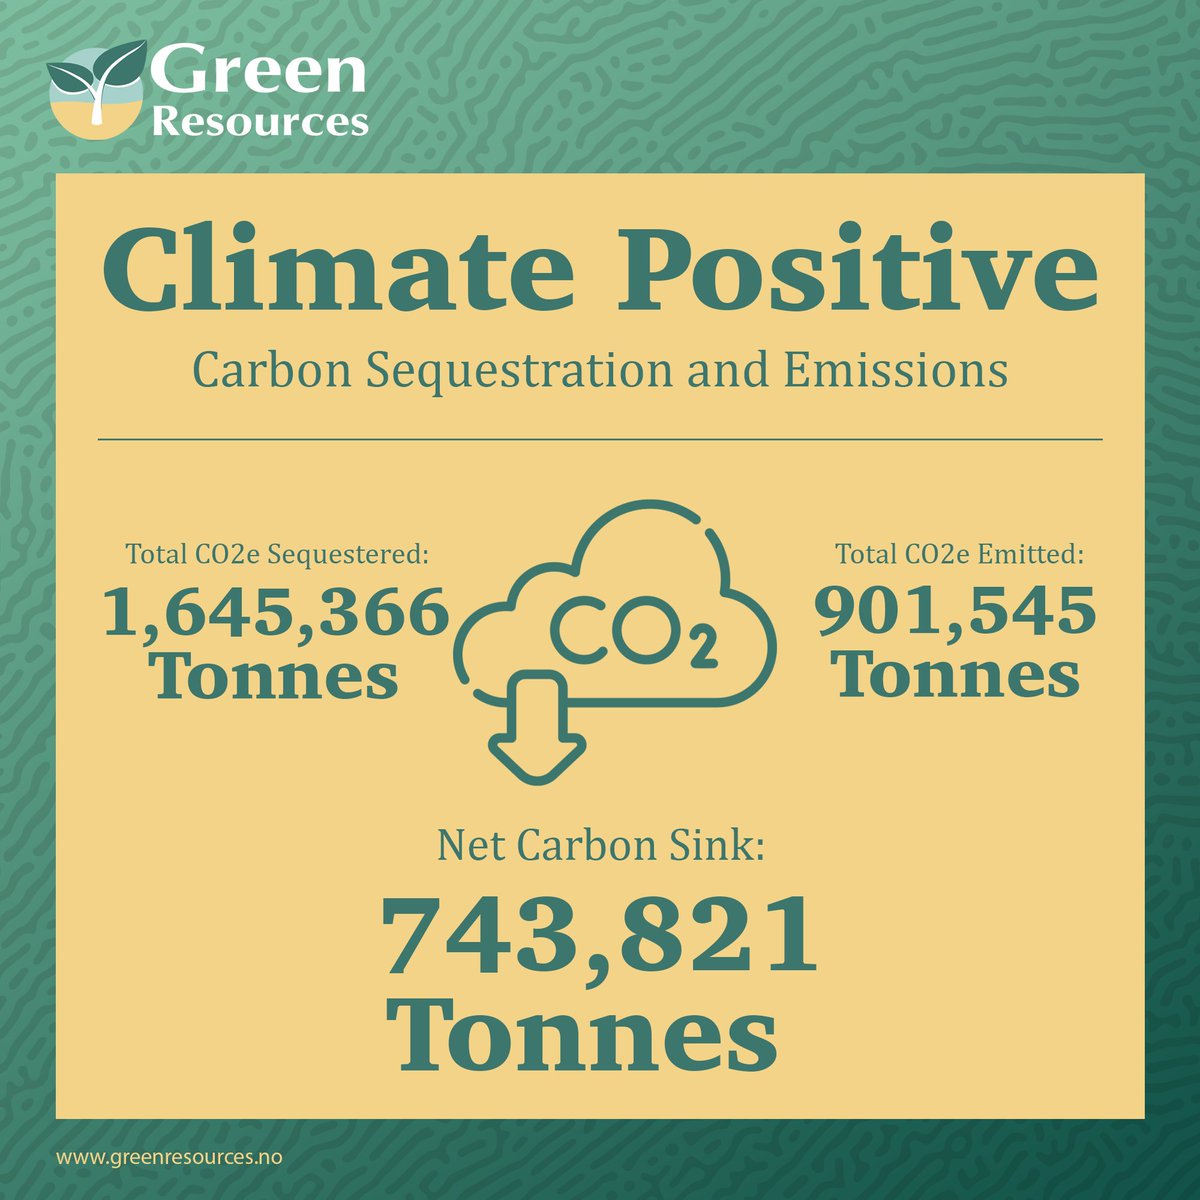 Proudly climate positive. Last year, we sequestered 1,645,366 tonnes of CO2e while emitting 901,545 tonnes. That's a net carbon sink of 743,821 tonnes in Mozambique, Tanzania, and Uganda. Together, we're leading the charge against climate change for a greener planet. 🌿💚